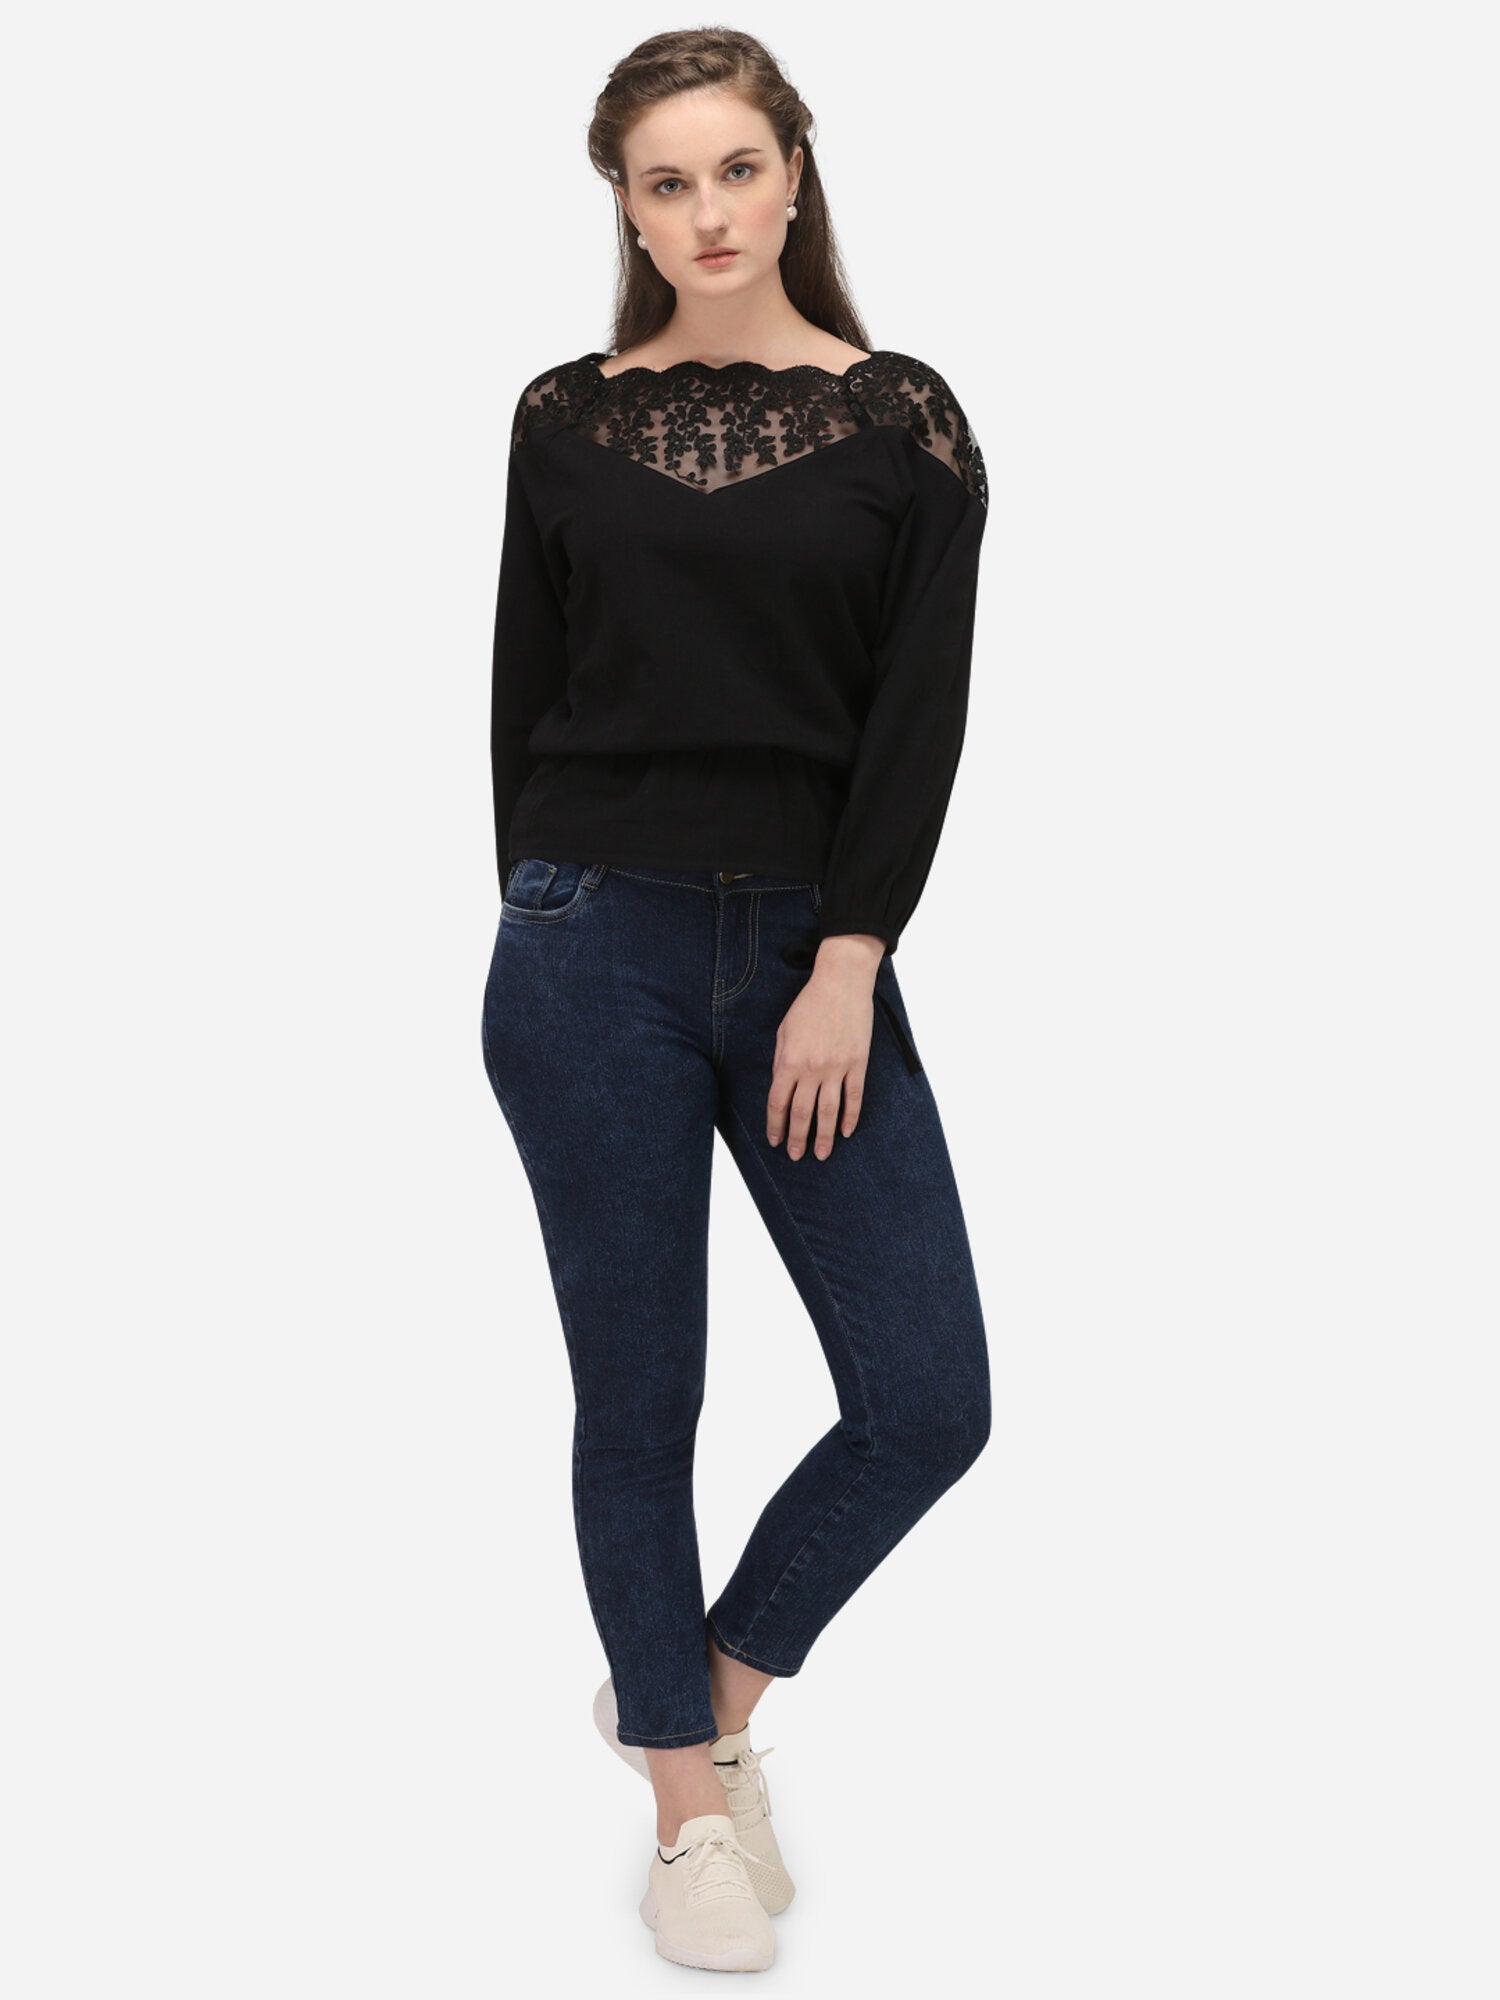 Women's Black Embroidered Full Sleeve Only Top - MESMORA FASHION